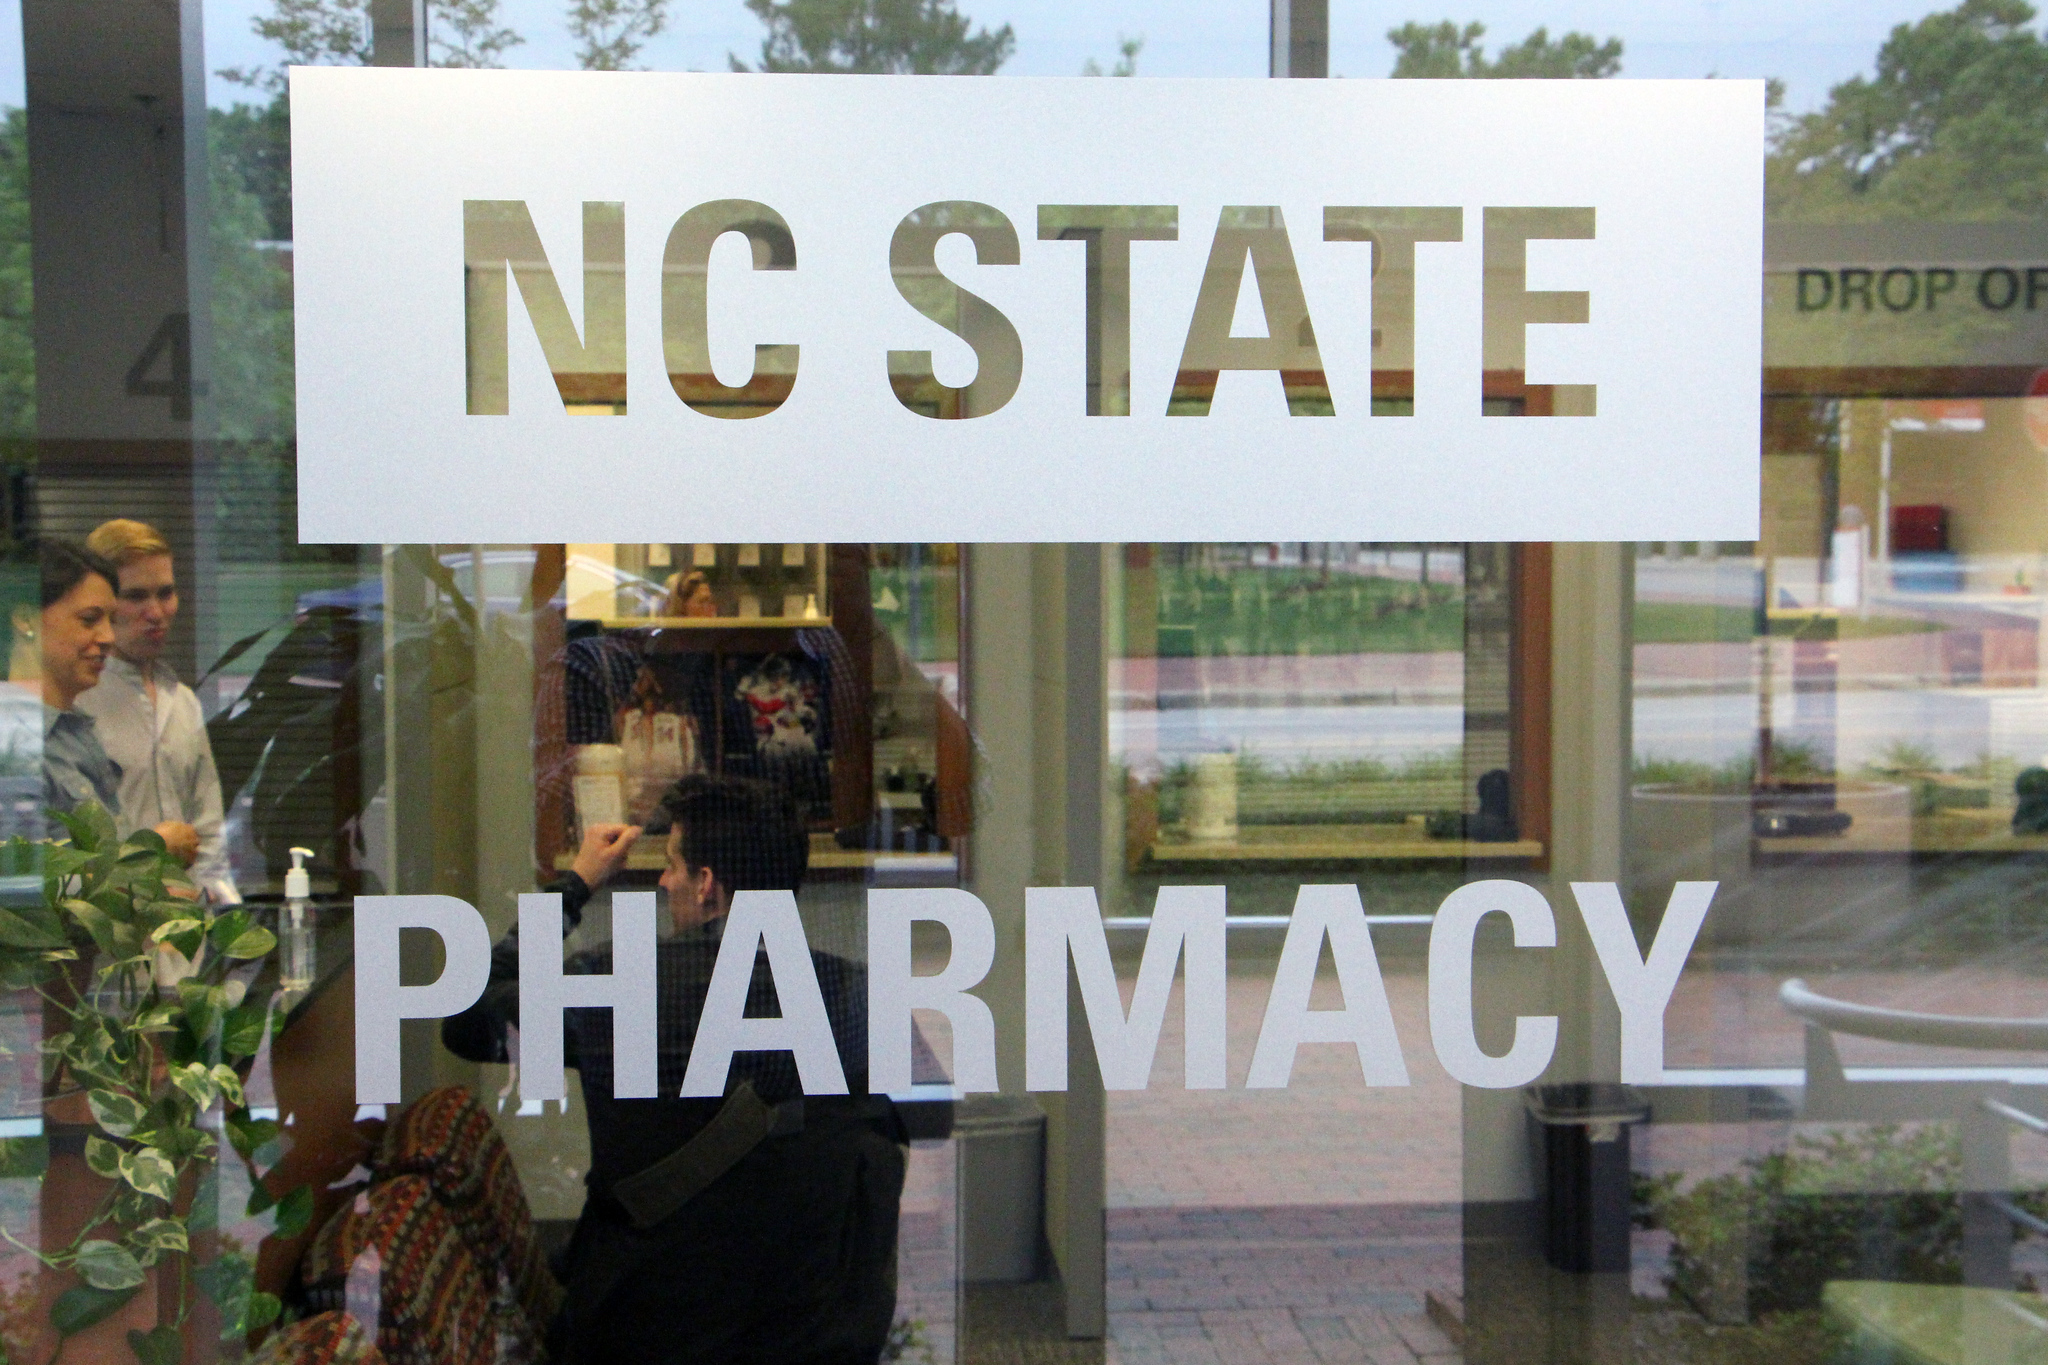 A sign for the NC State Pharmacy